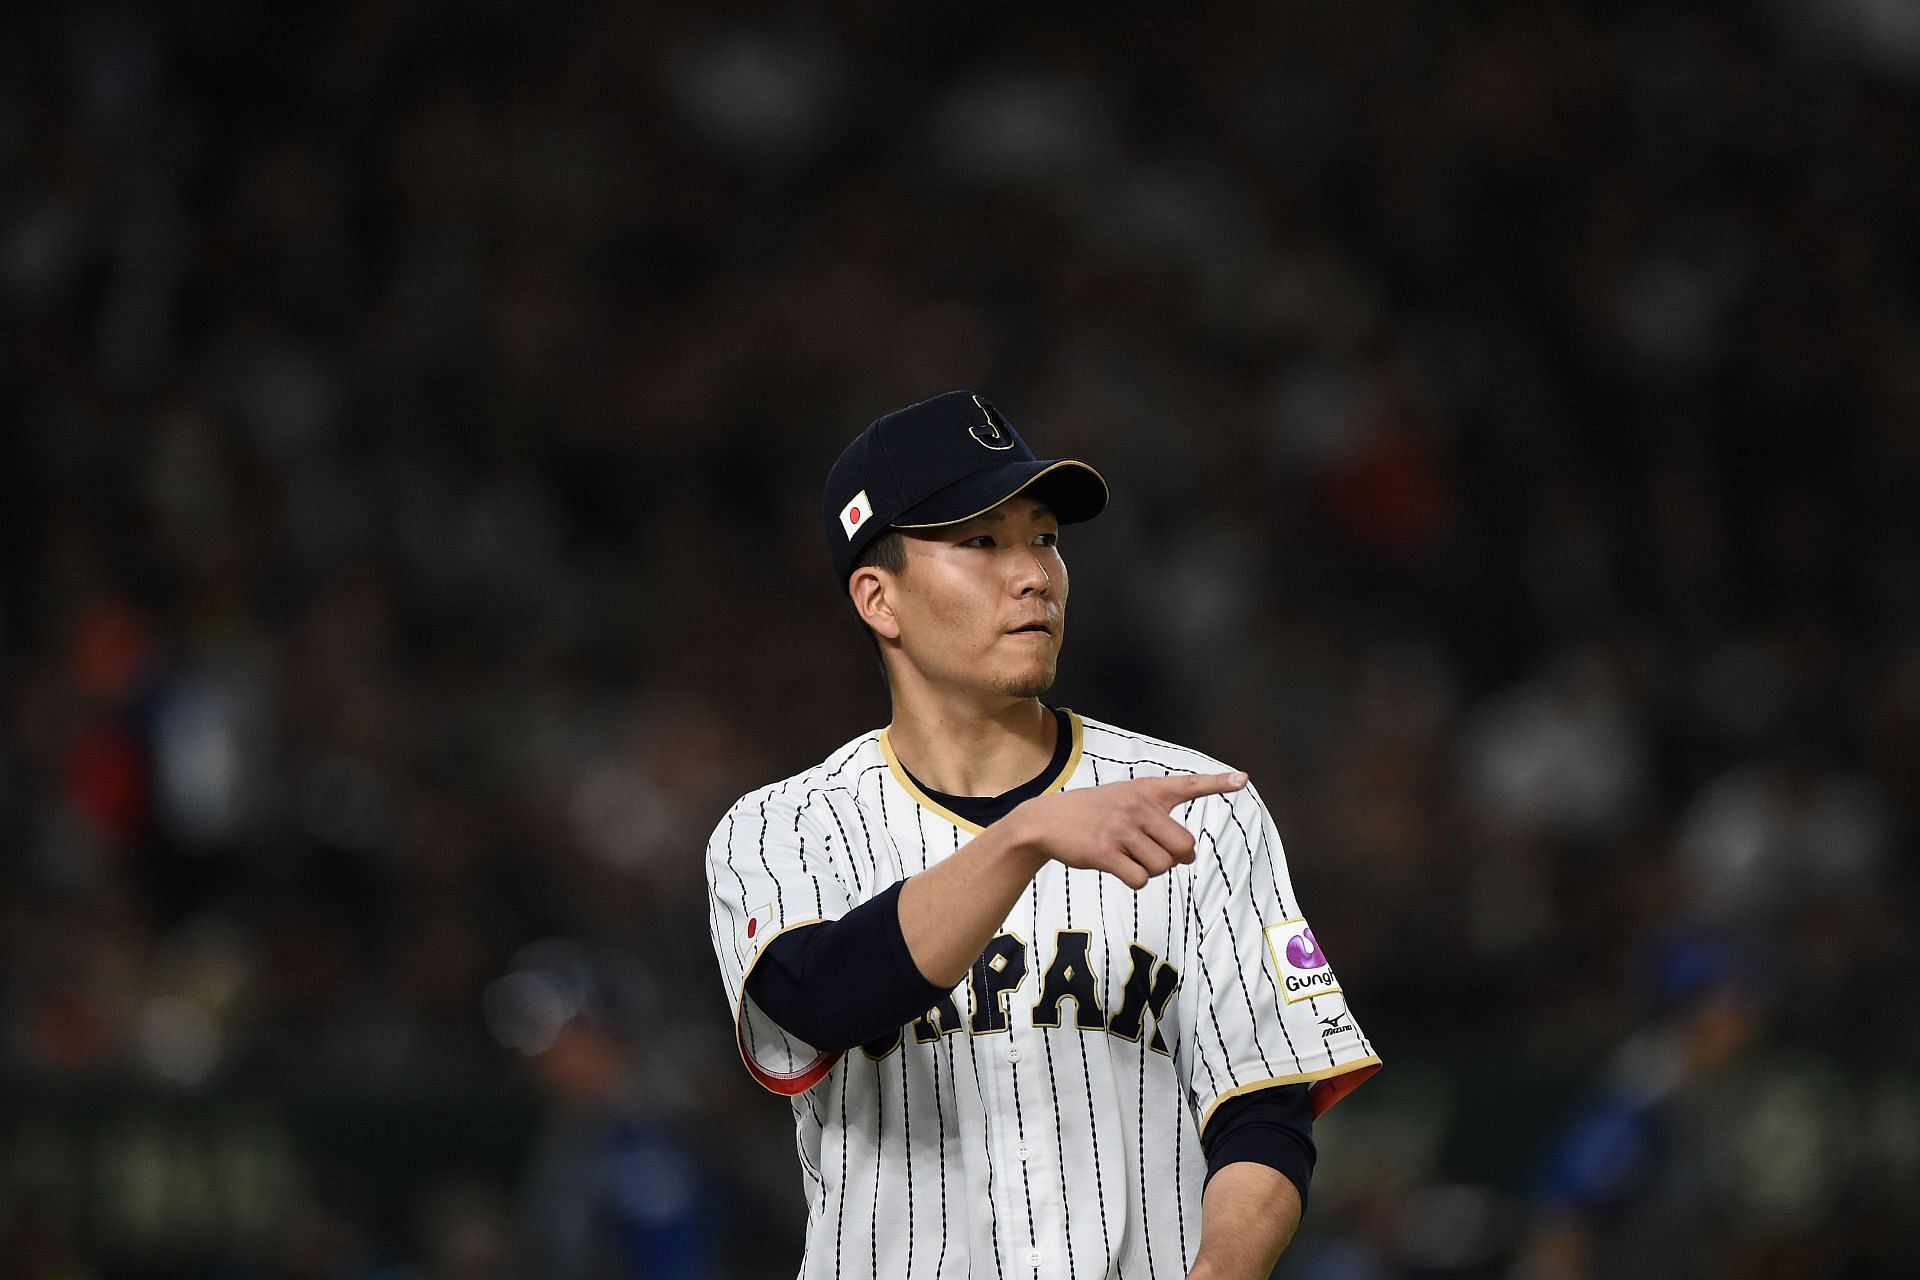 Pitcher Kodai Senga teases fans with two-way comparison to Shohei Ohtani  ahead of his New York Mets debut